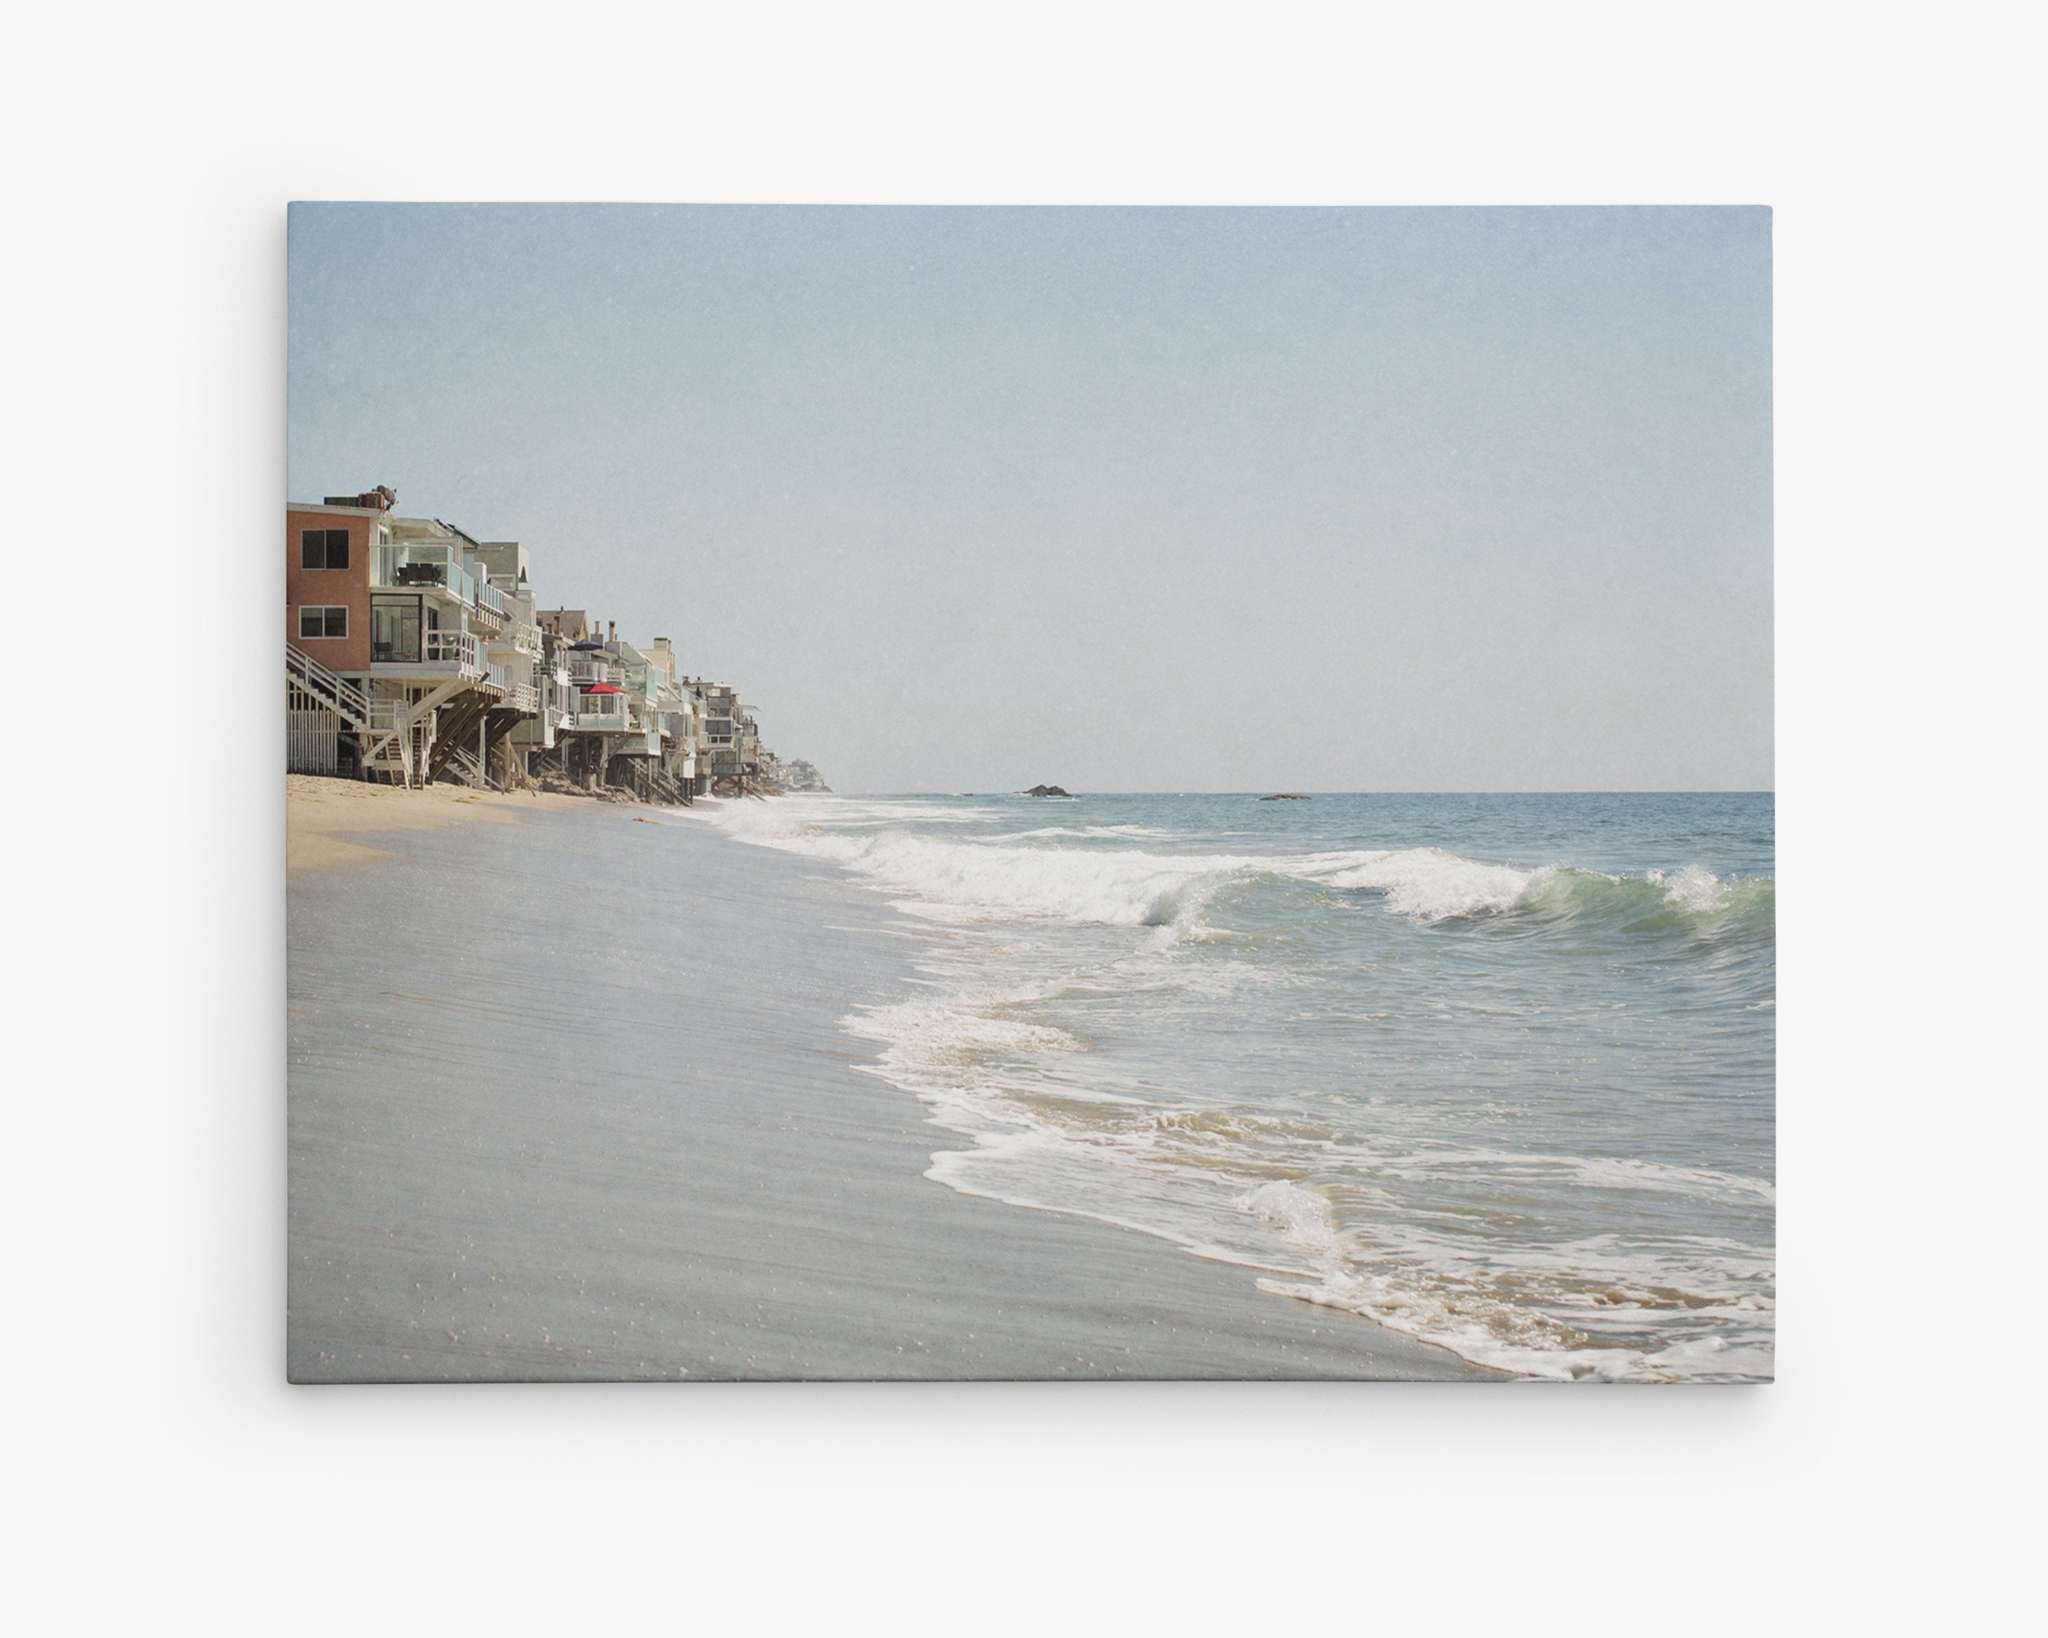 A serene beach scene with gentle waves washing up on the sandy shore. Beachfront houses on stilts line the left side, overlooking the ocean along the Malibu coastline. The sky is clear with a subtle gradient of blue, signaling a sunny day. This scene exudes tranquility and coastal charm, perfect for Offley Green's Malibu Beach House Canvas Wall Art, 'Ocean View'.